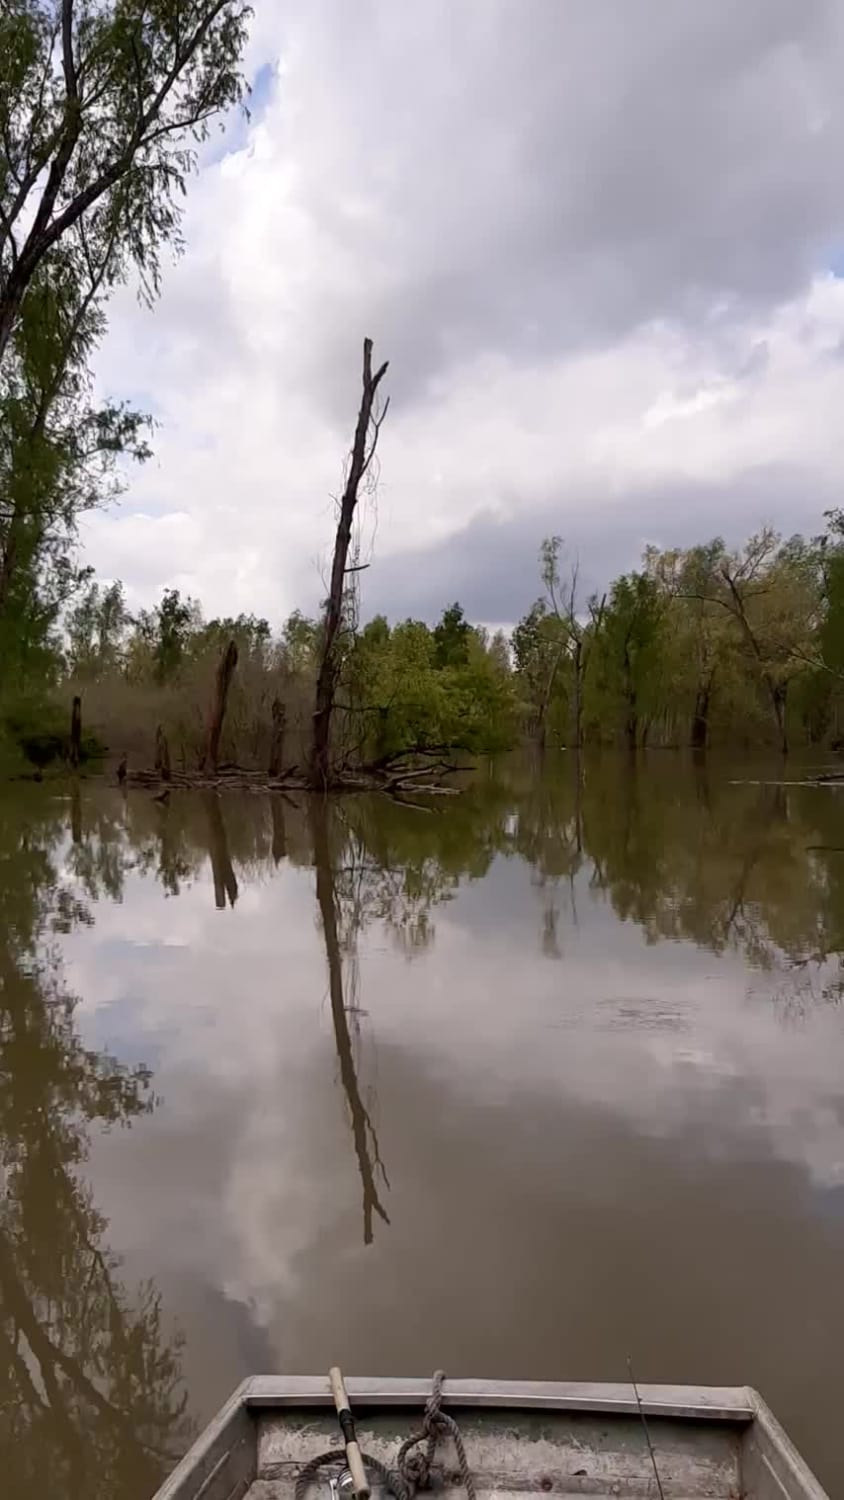 The sounds of this bayou on the Mississippi River